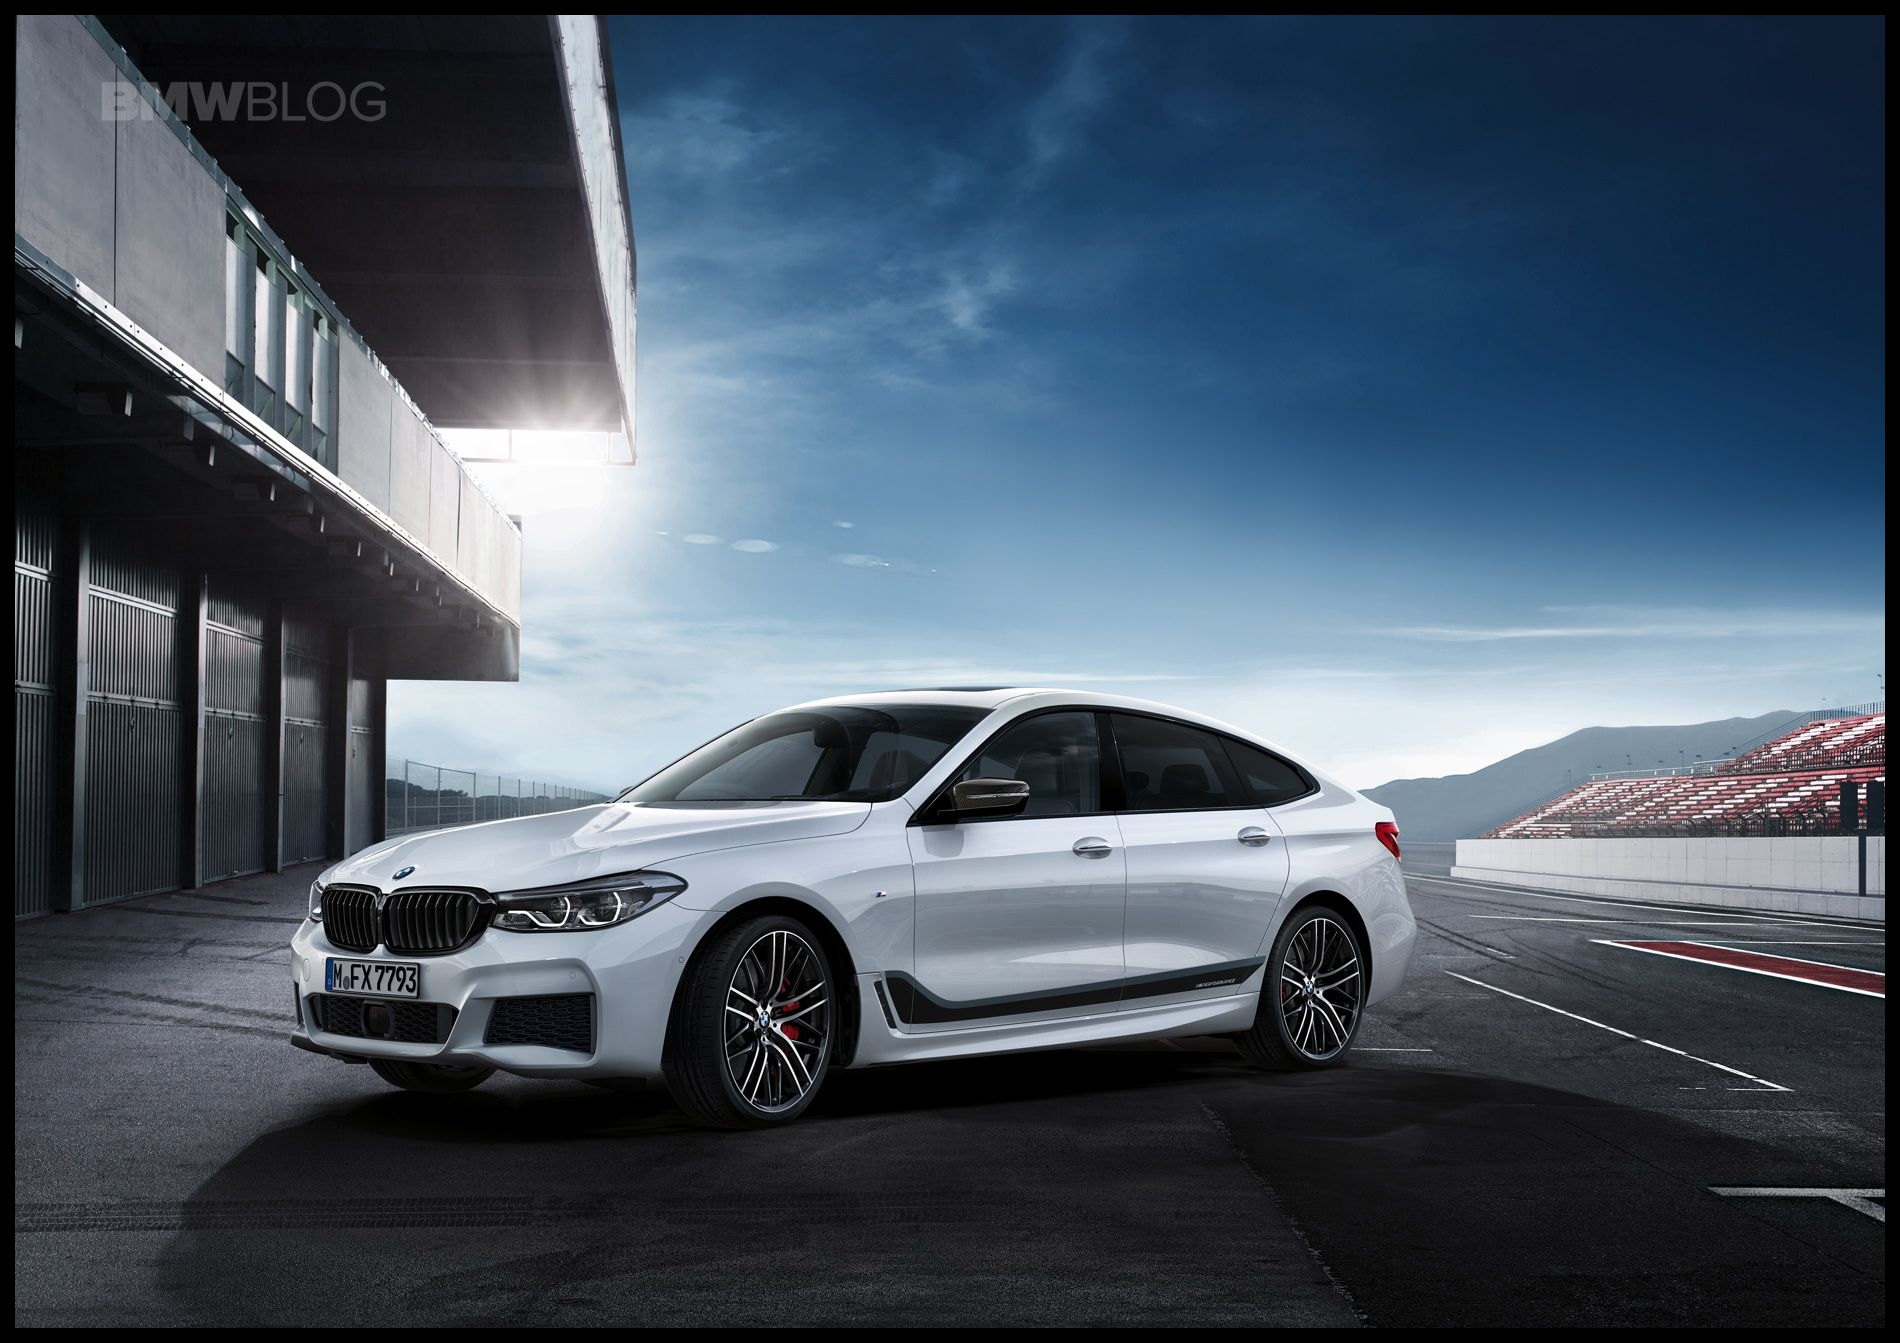 The BMW M Performance Tuning accessory for the new BMW 6 Series GT will be available directly to the market launch on November 11 2017